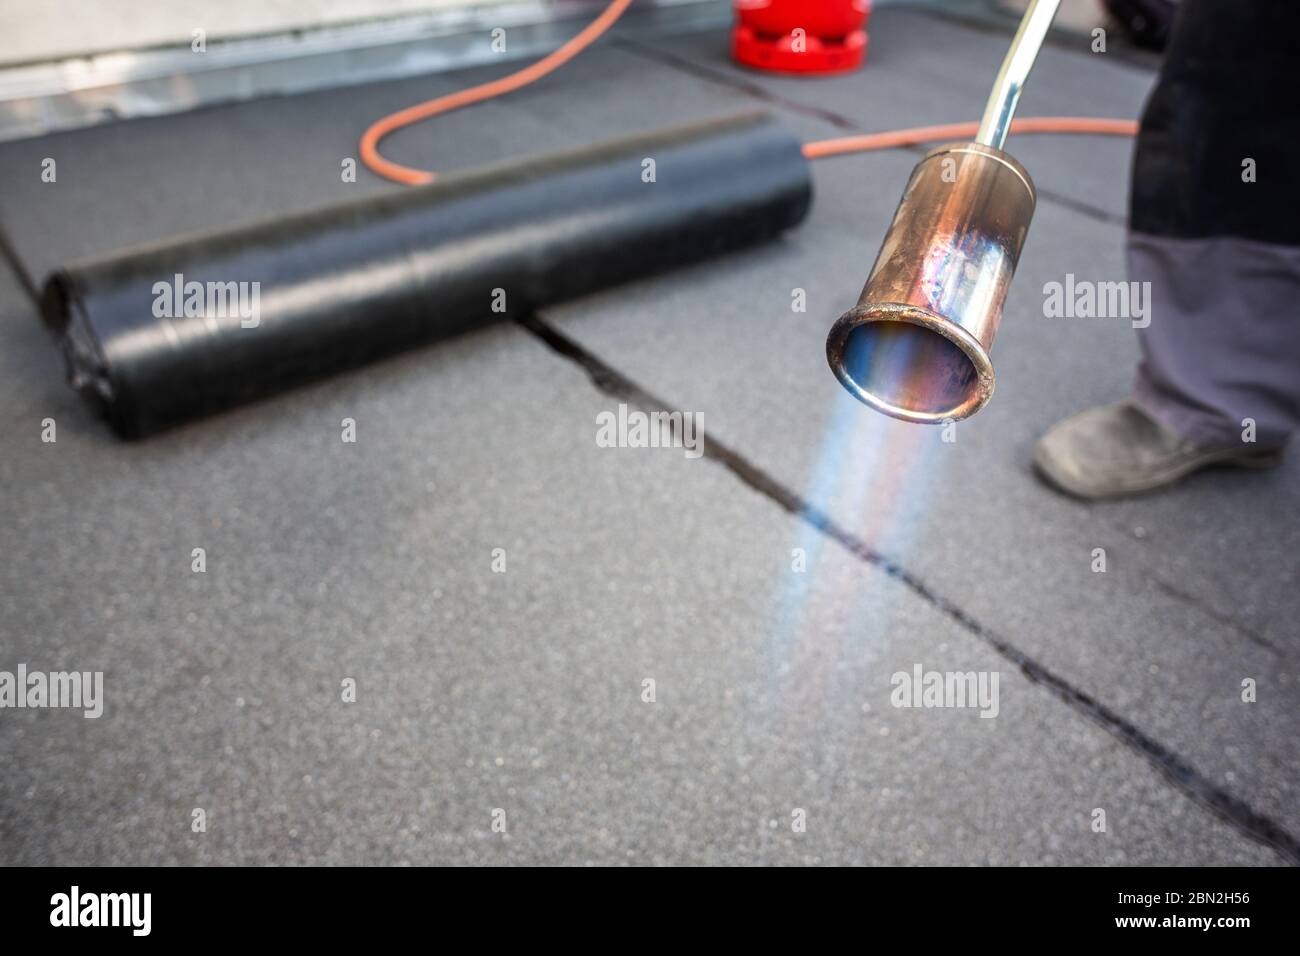 Bitumen roofing felt and burning gas torch Stock Photo